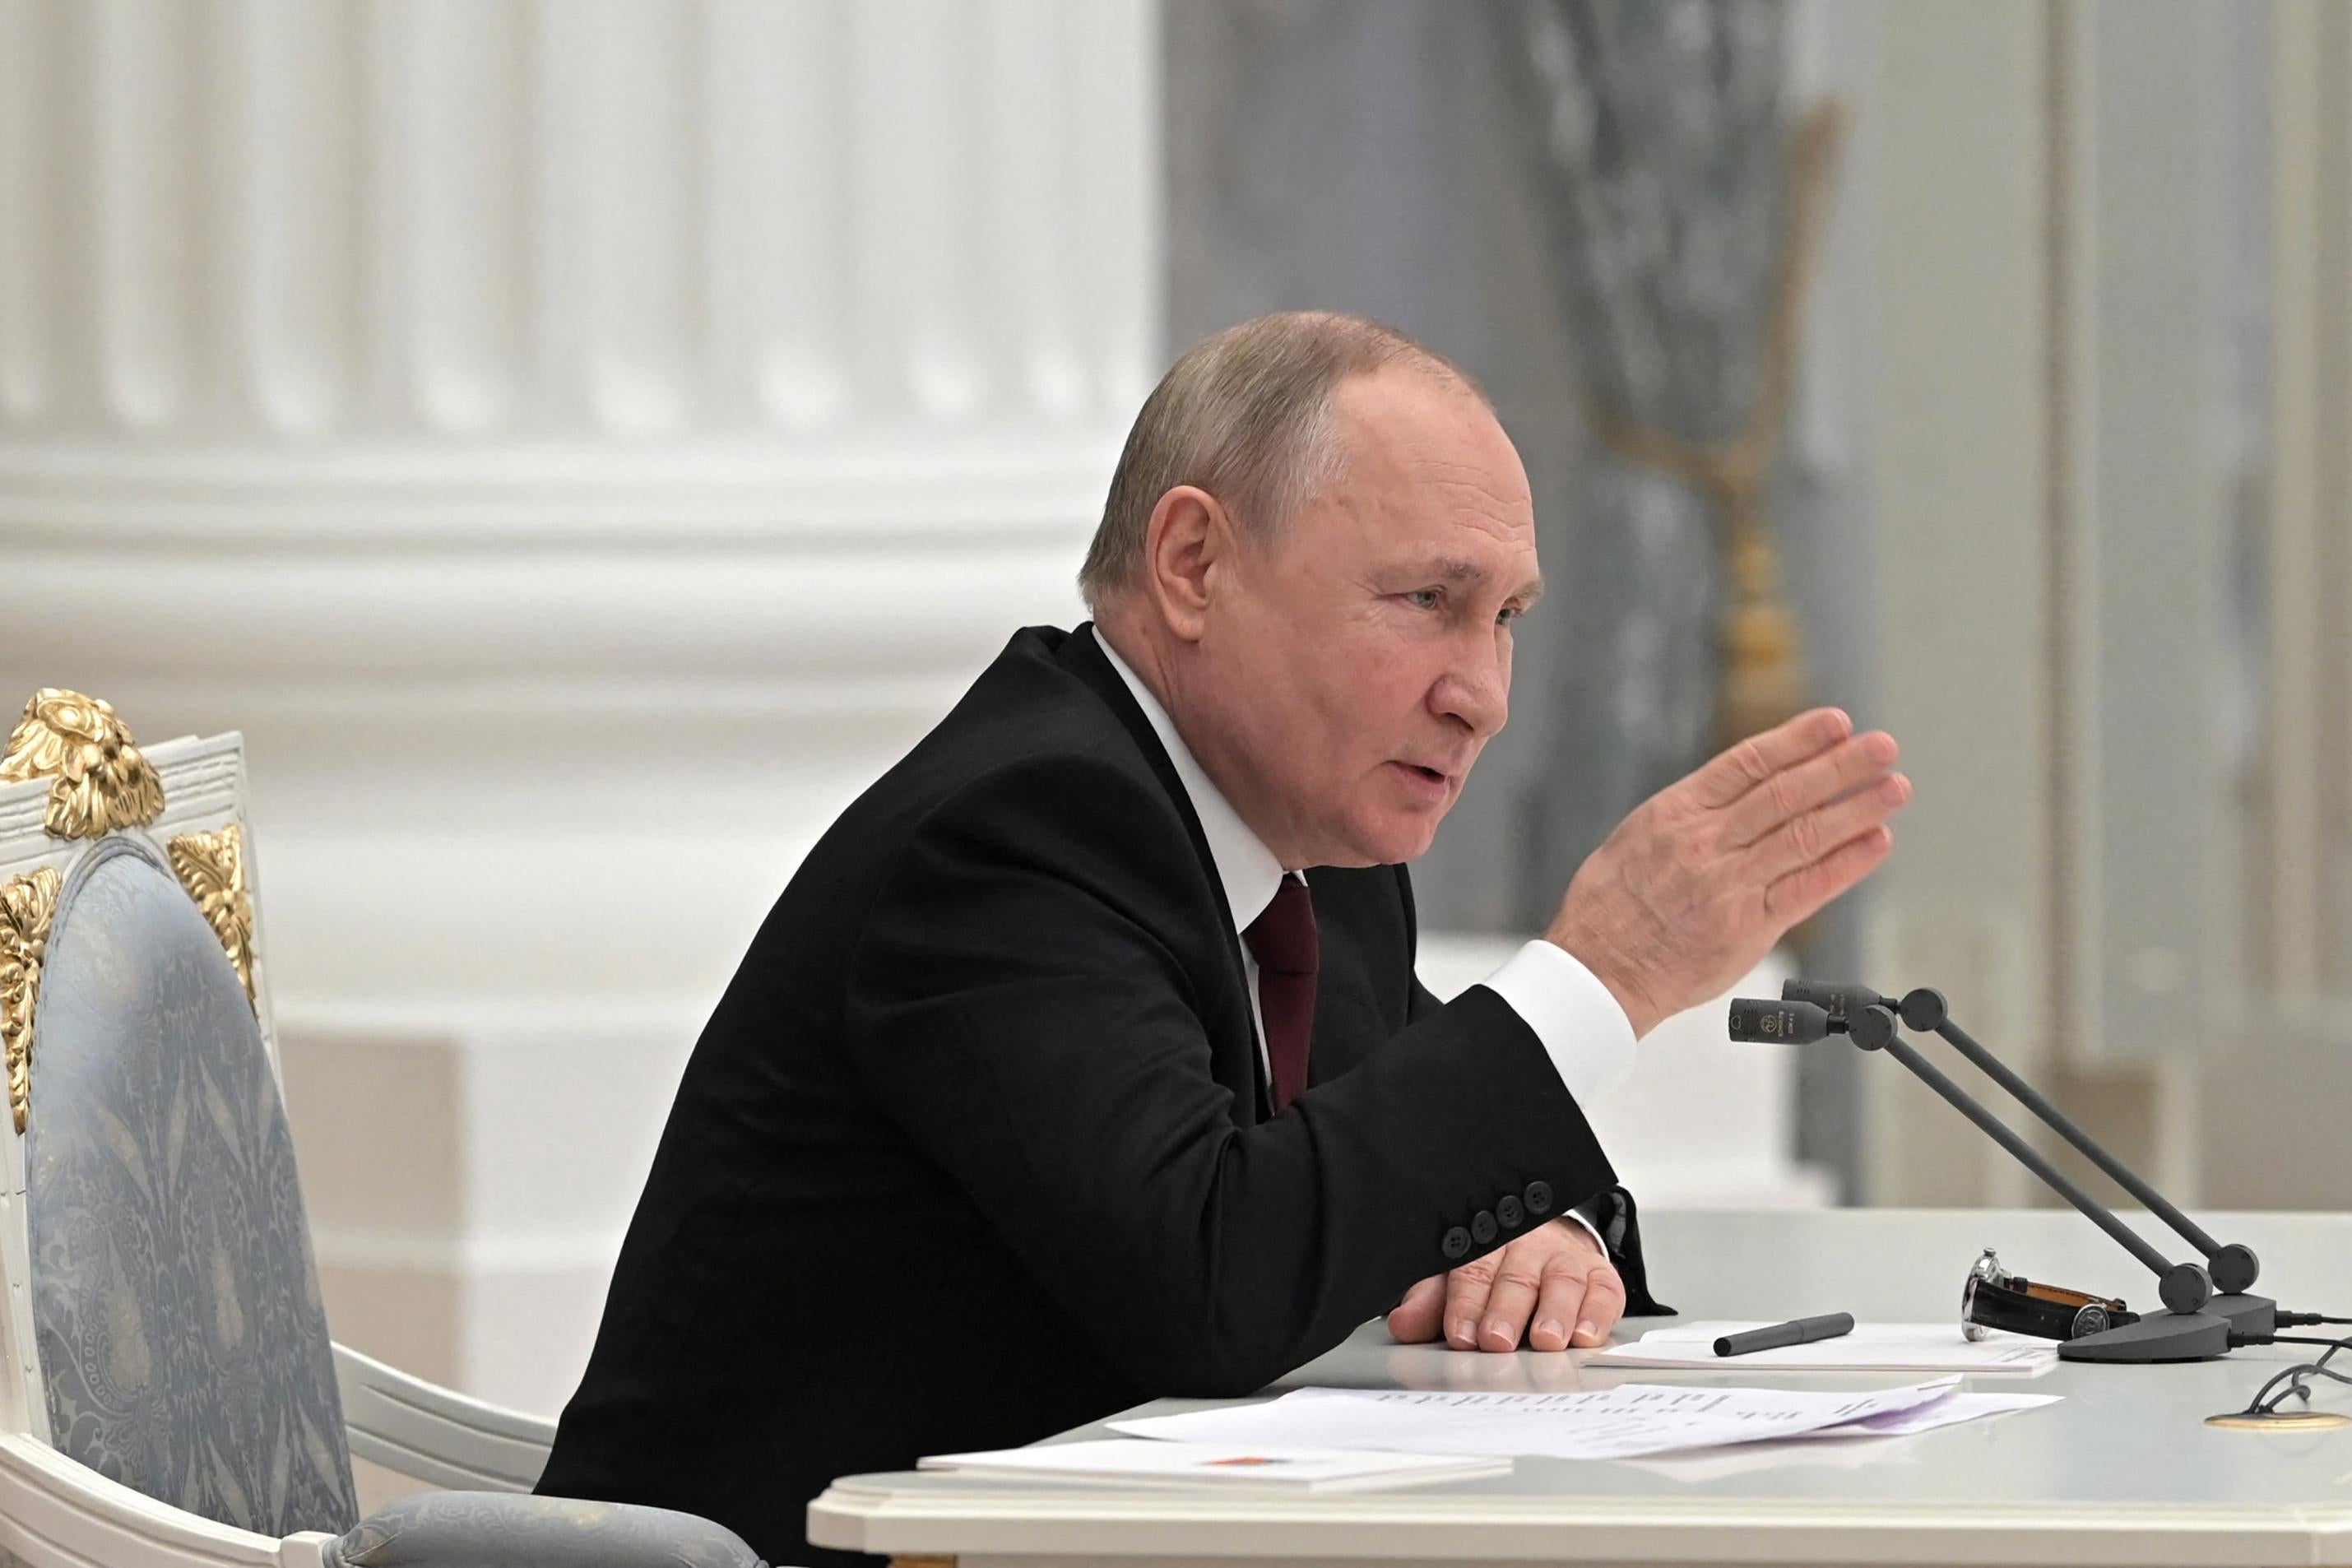 Vladimir Putin makes a chopping motion with his hand as he sits at a table in front of microphones.